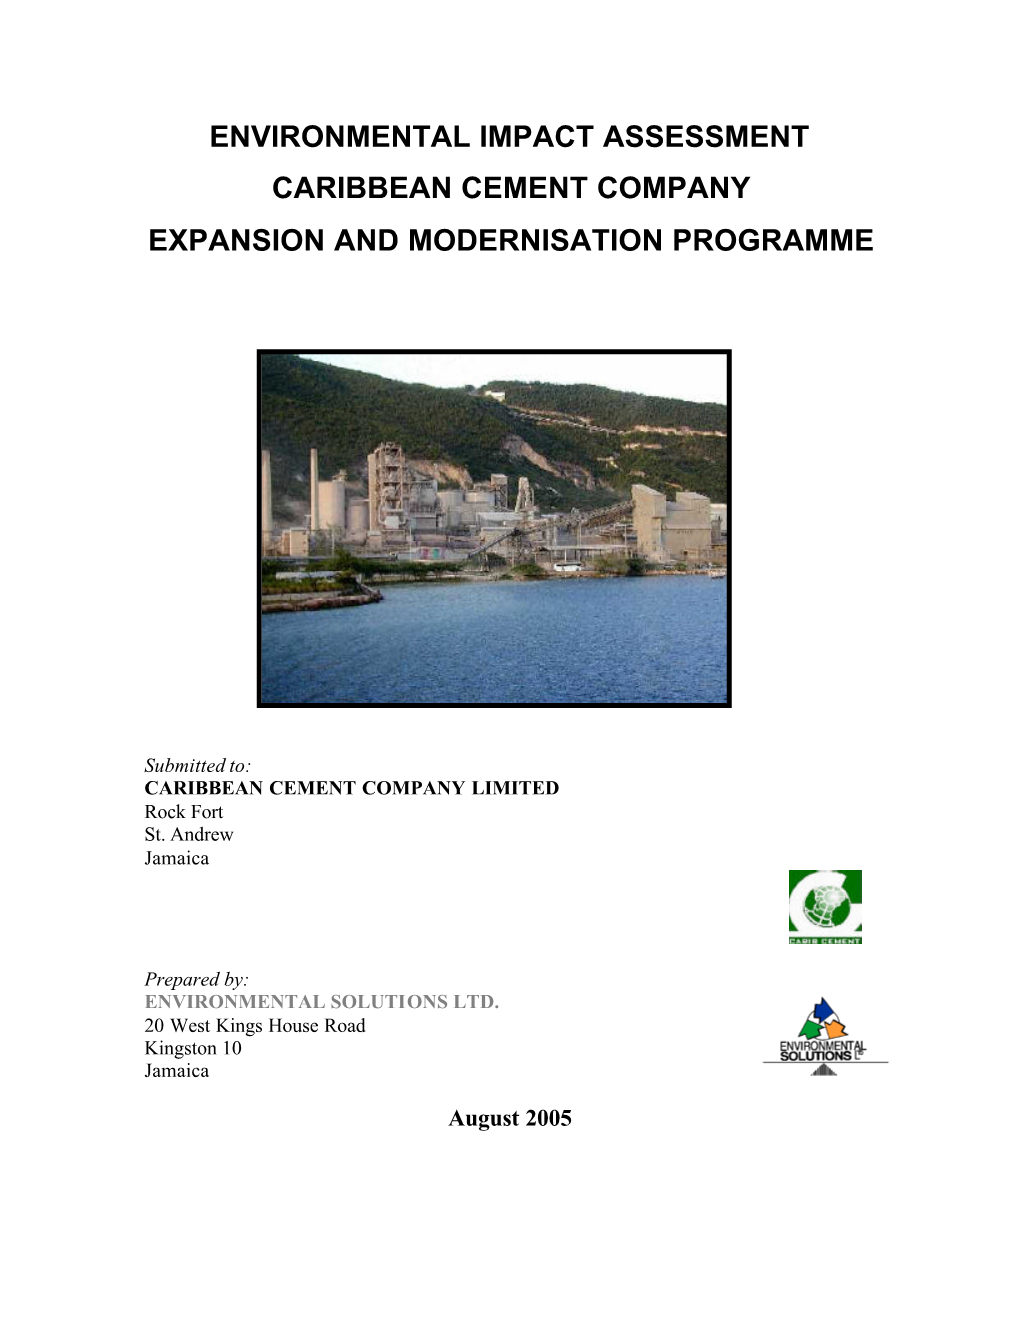 From Carib Cement L and the Other Major Contributors to the Airshed Could Have Significant Impacts on Neighbouring Communities